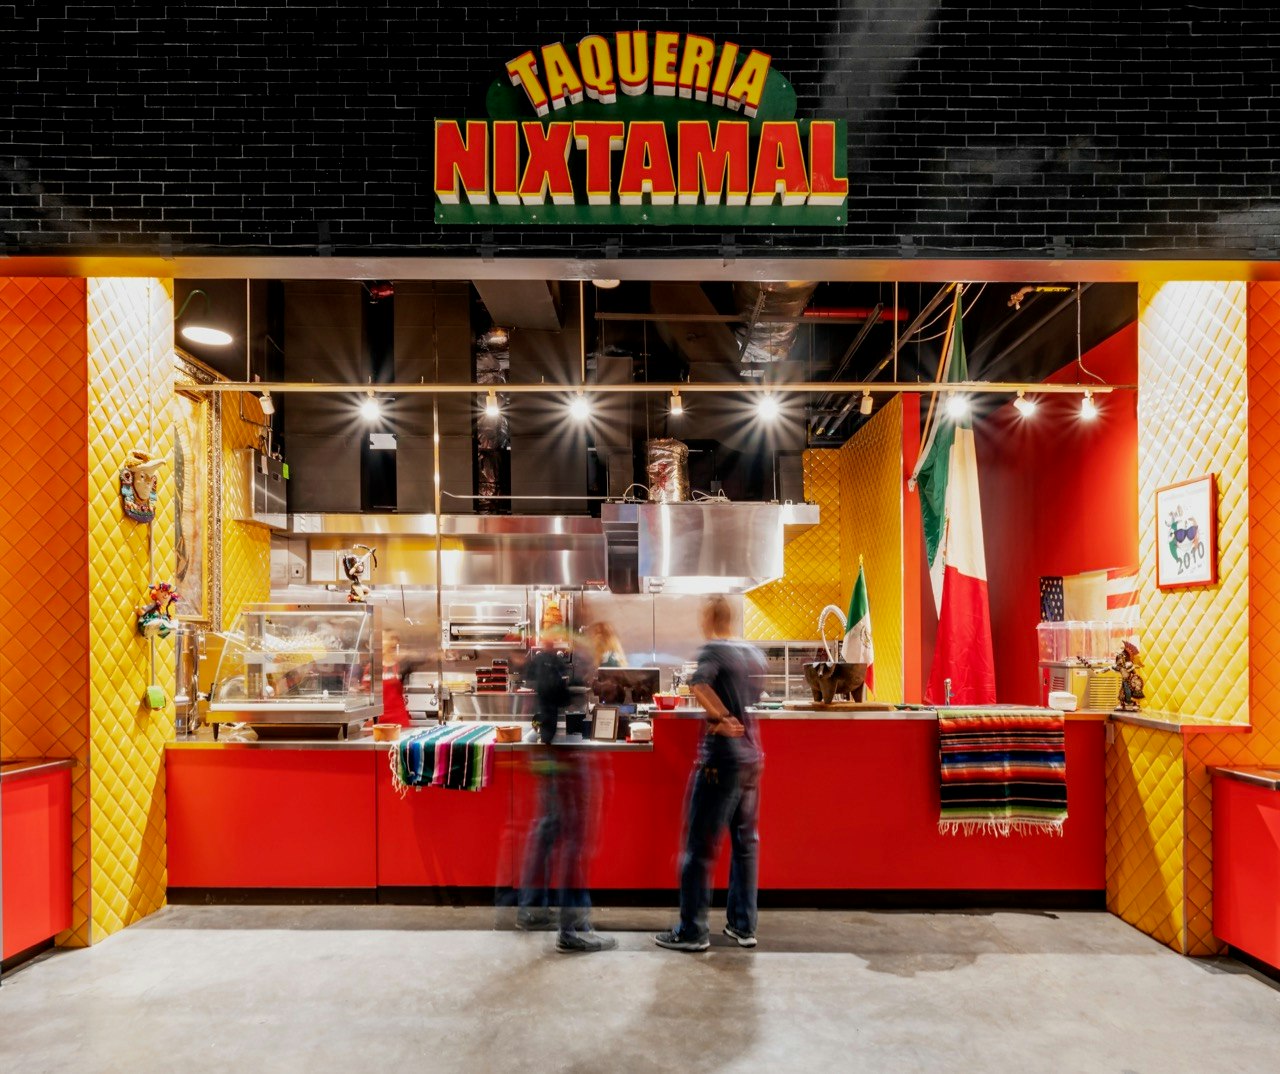 The Taqueria Nixtamal storefront - bright red counter, yellow and red walls, with Mexican flags hanging to the right